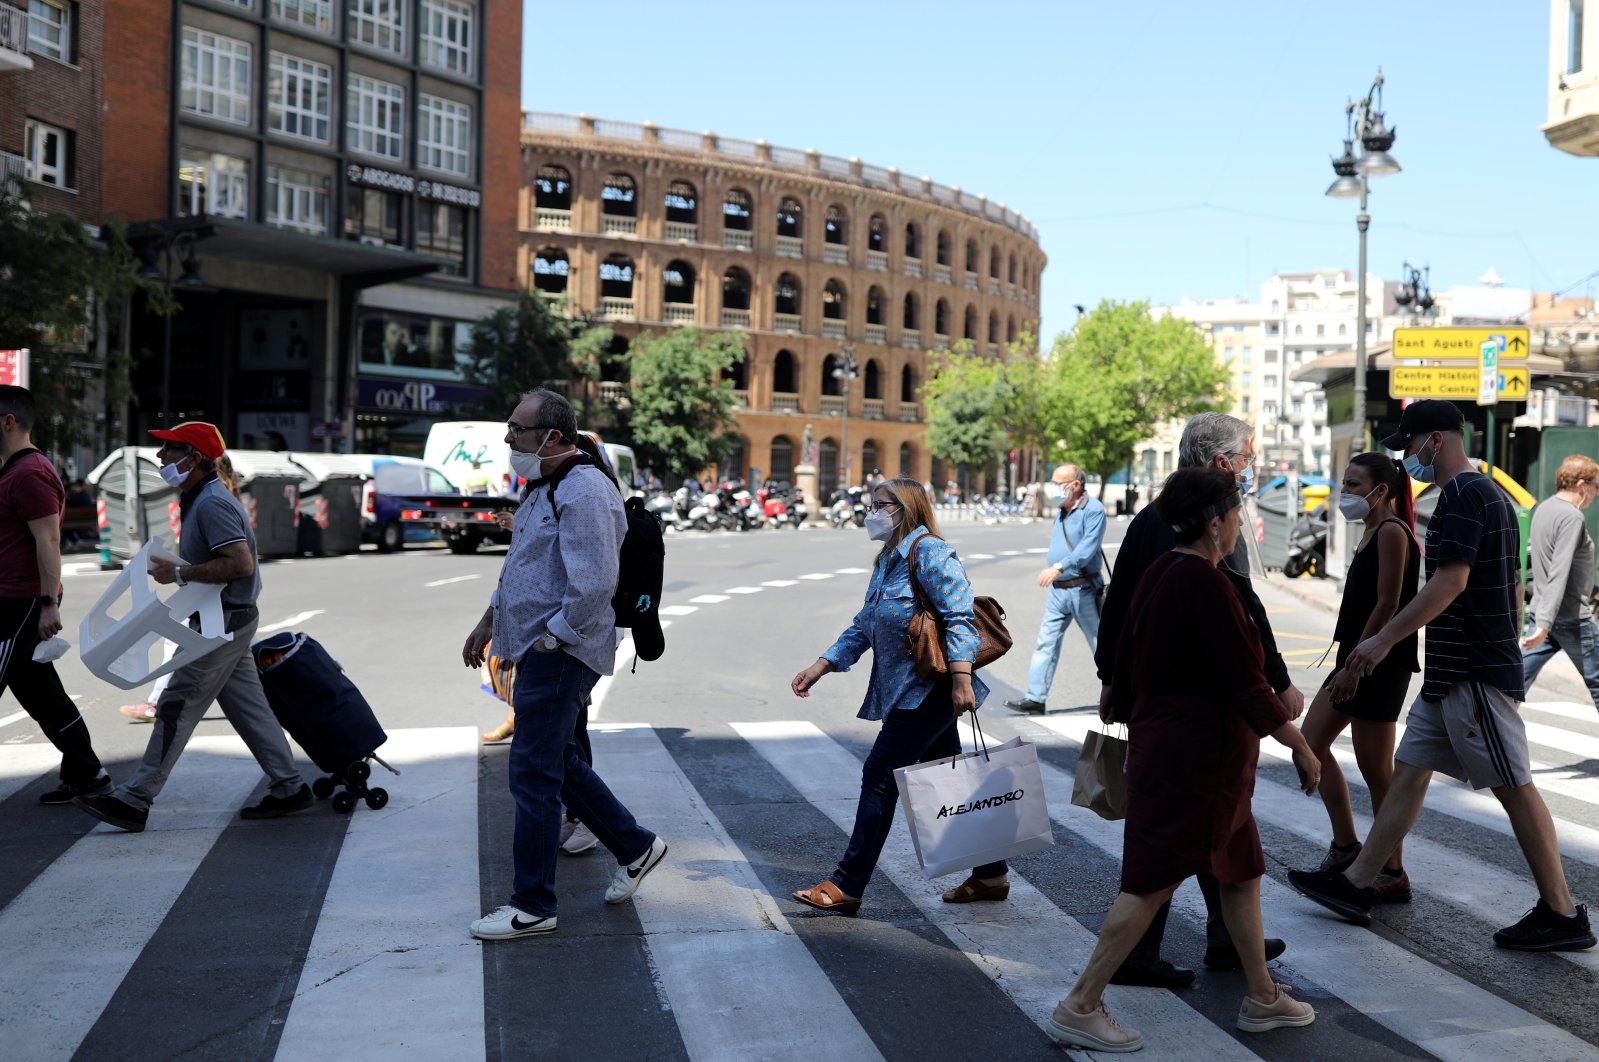 People wearing face masks walk on a crosswalk, as some Spanish provinces are allowed to ease lockdown restrictions during phase one, amid the coronavirus outbreak, in Valencia, Spain, May 19, 2020. (Reuters Photo)